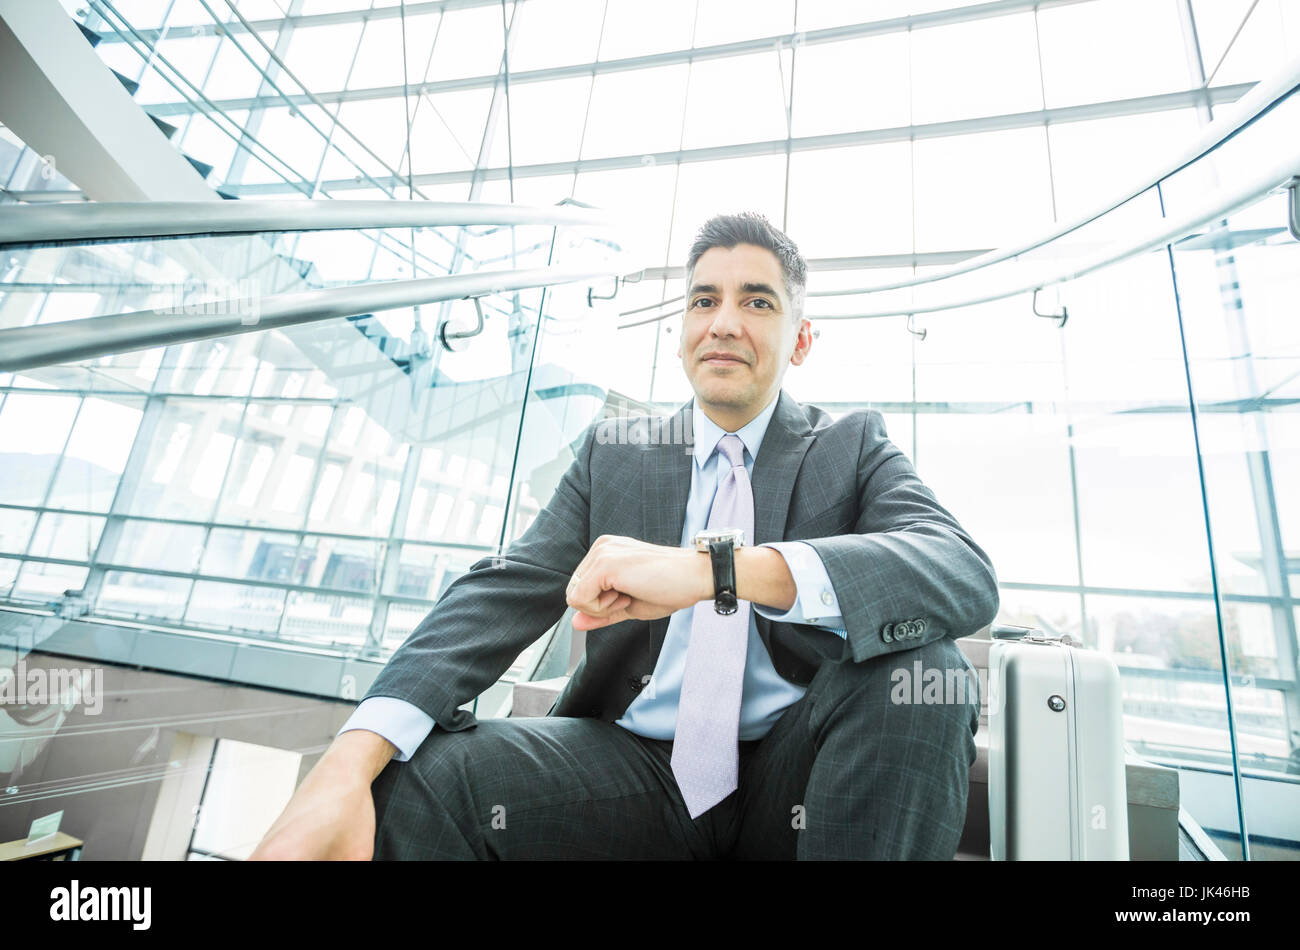 Portrait of smiling Mixed Race businessman sitting on staircase Stock Photo